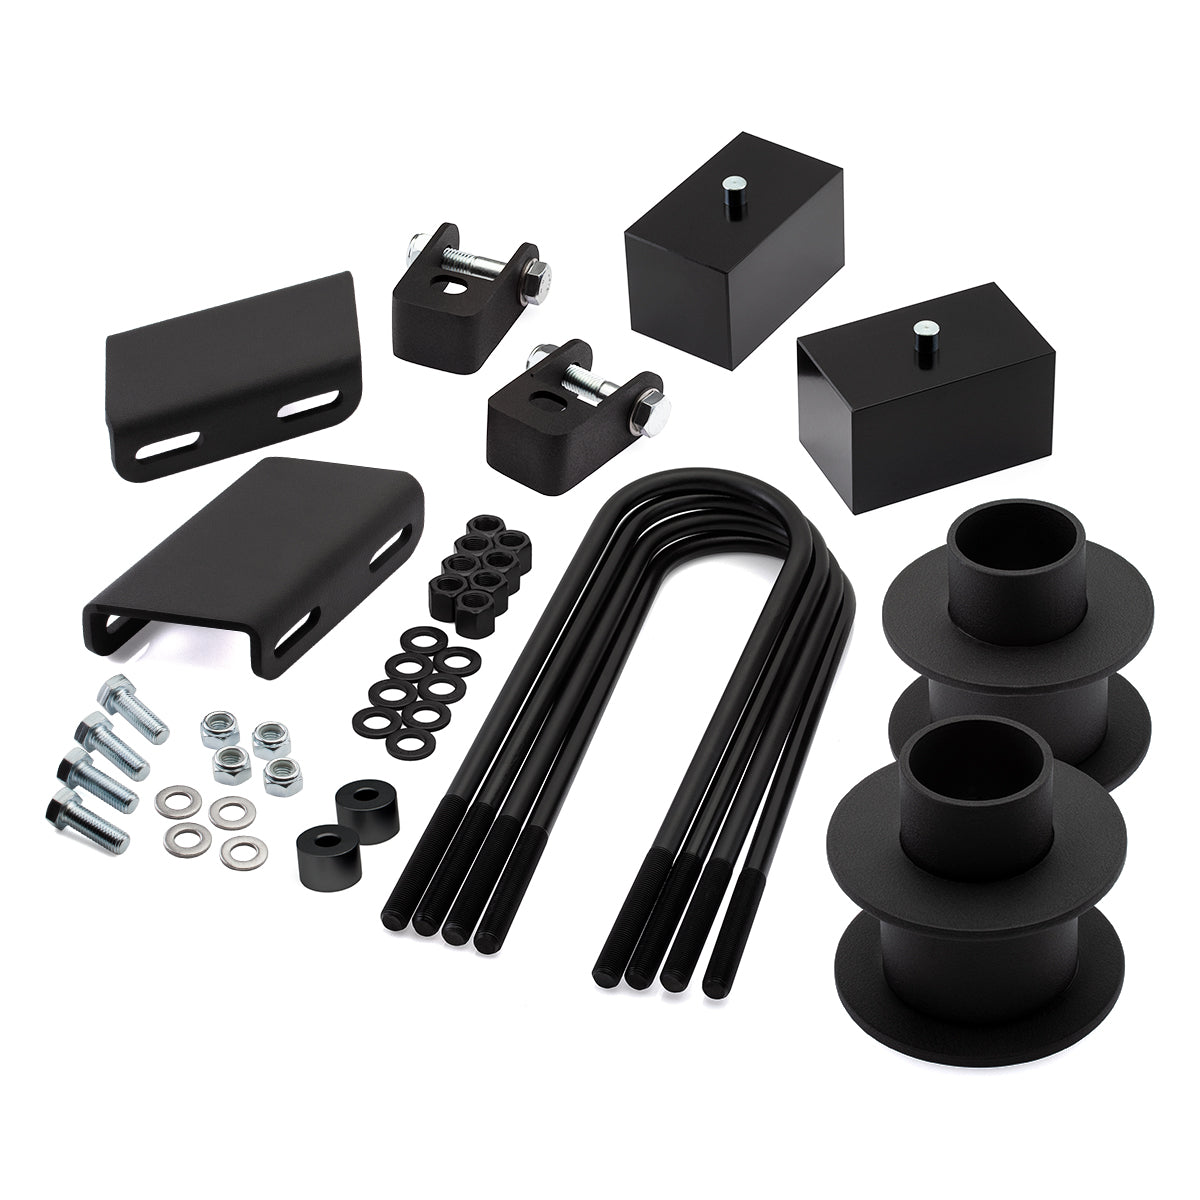 2008-2022 Ford F-250 Full Lift Kit with Bump Stop / Shock Extenders + Sway Bar